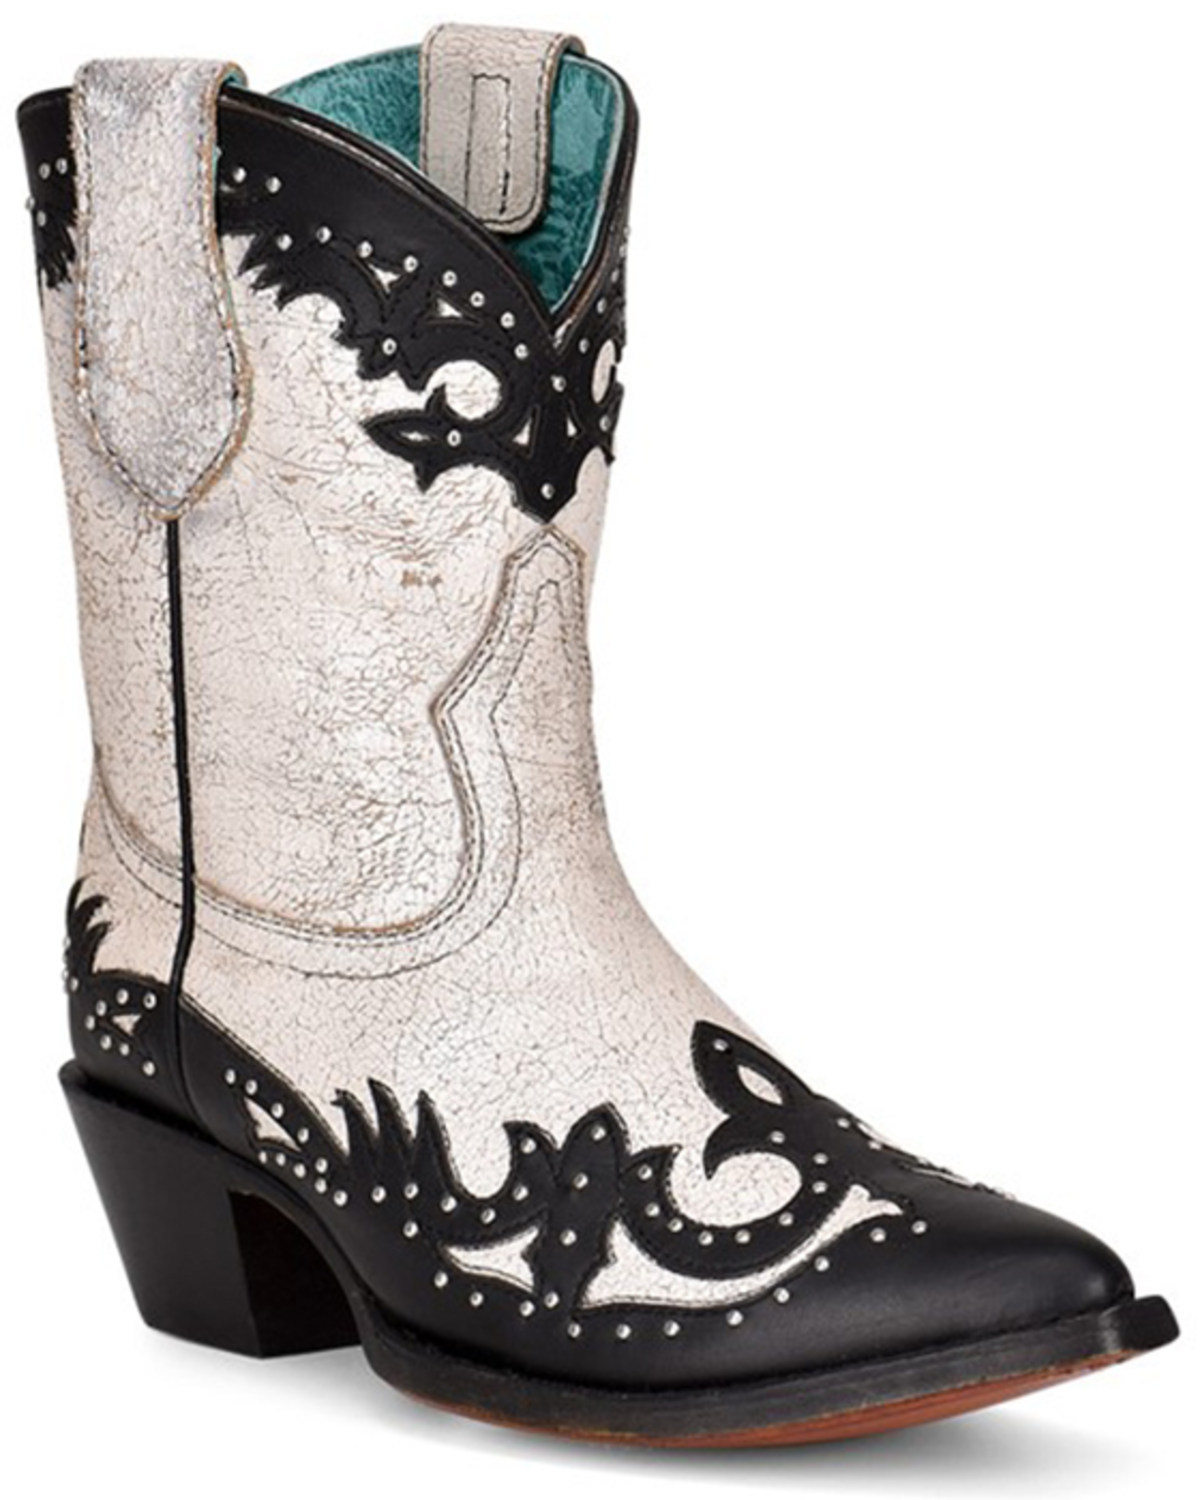 Corral Women's Black Overlay & Studs Western Boots - Pointed Toe